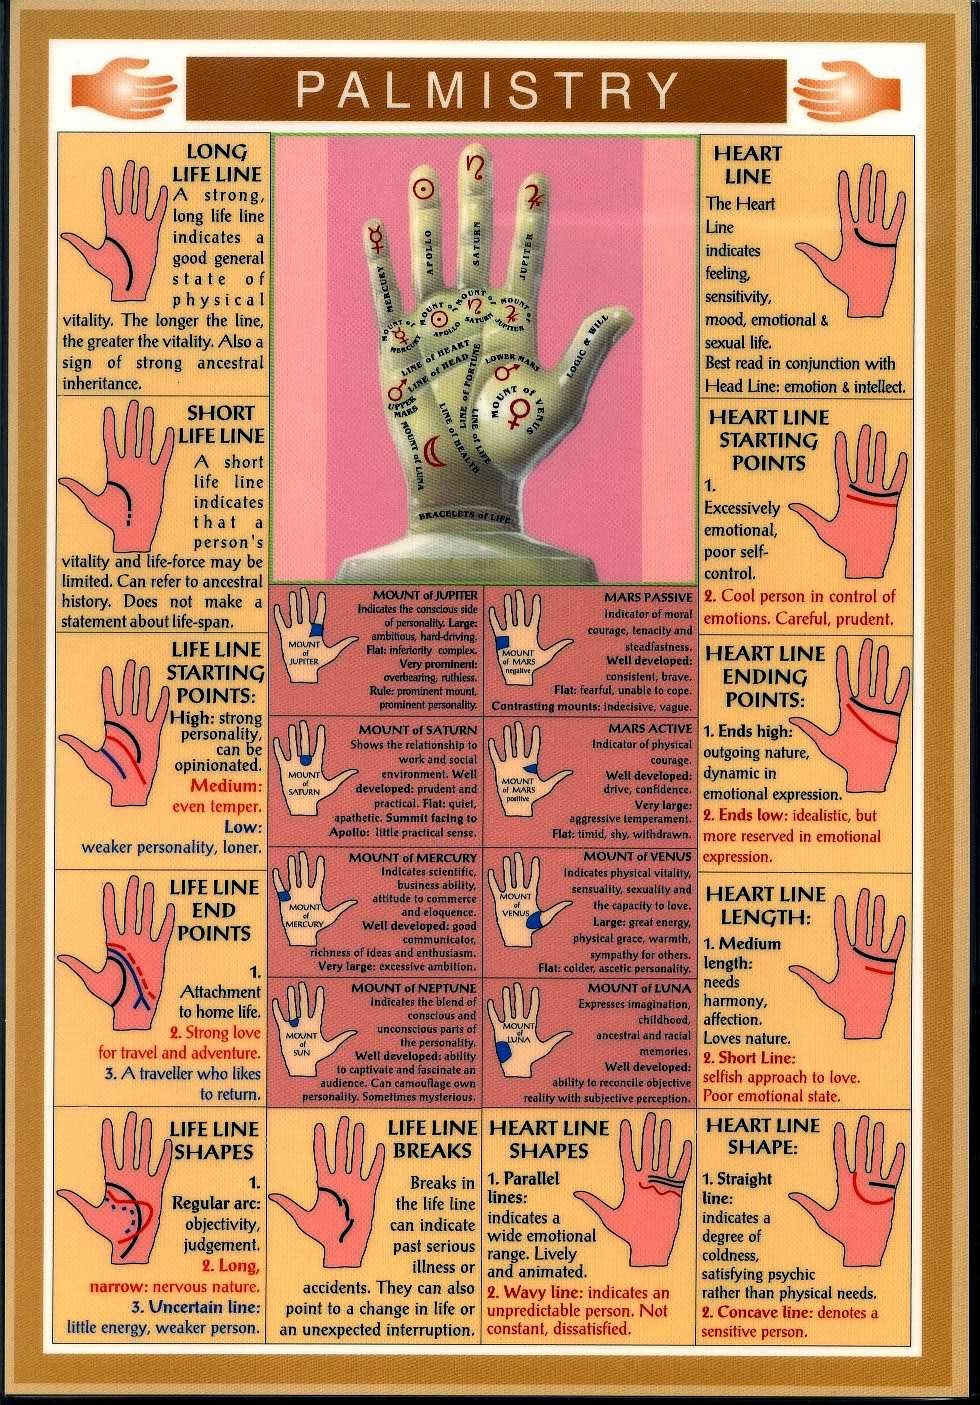 Read Your Own Palm Palmistry Palm Reading Secrets Useful Information